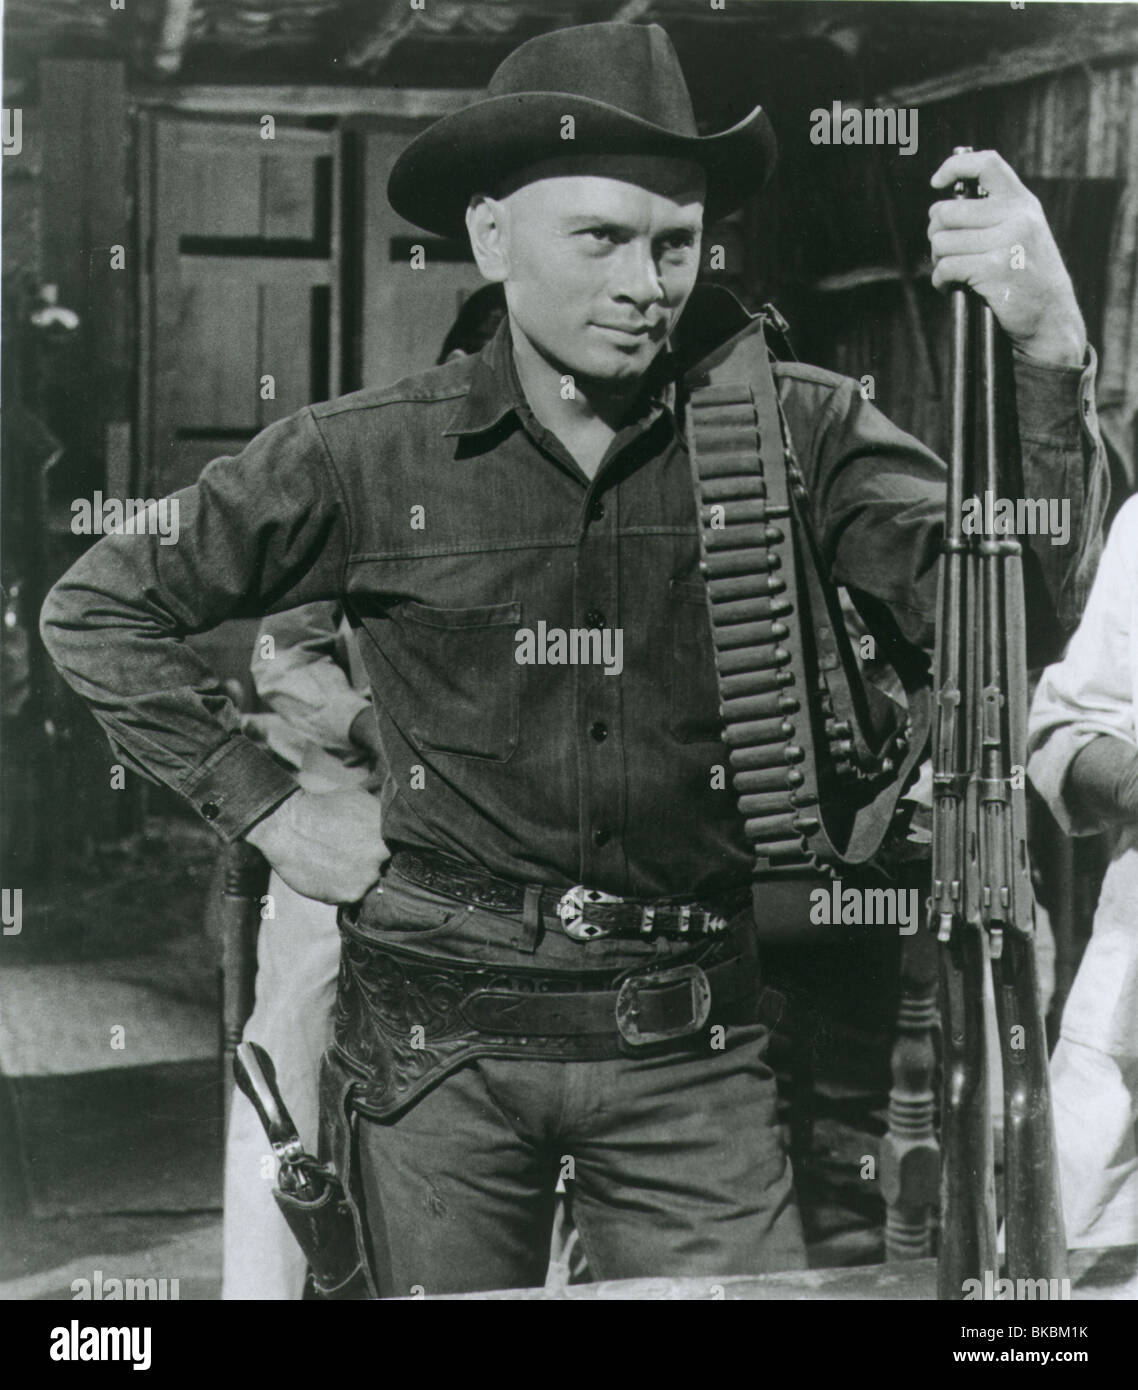 THE MAGNIFICENT SEVEN (1960) YUL BRYNNER MAGS 011P Stock Photo